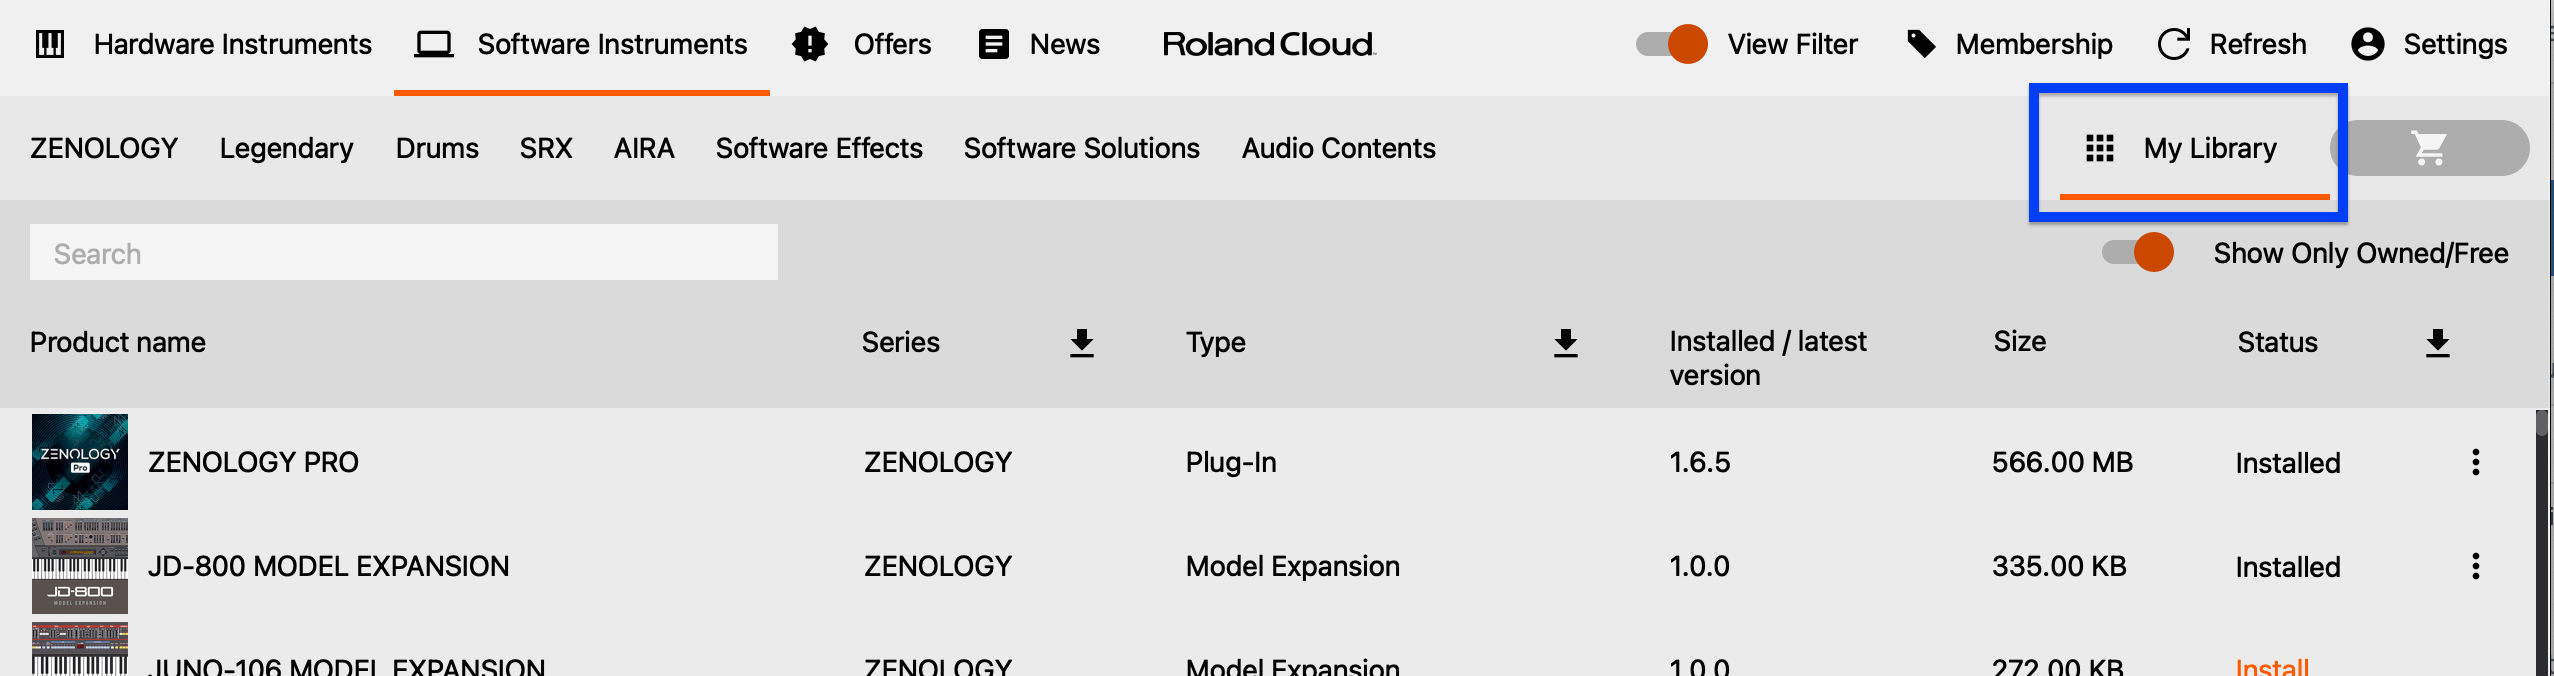 roland_cloud_manager_My_Library